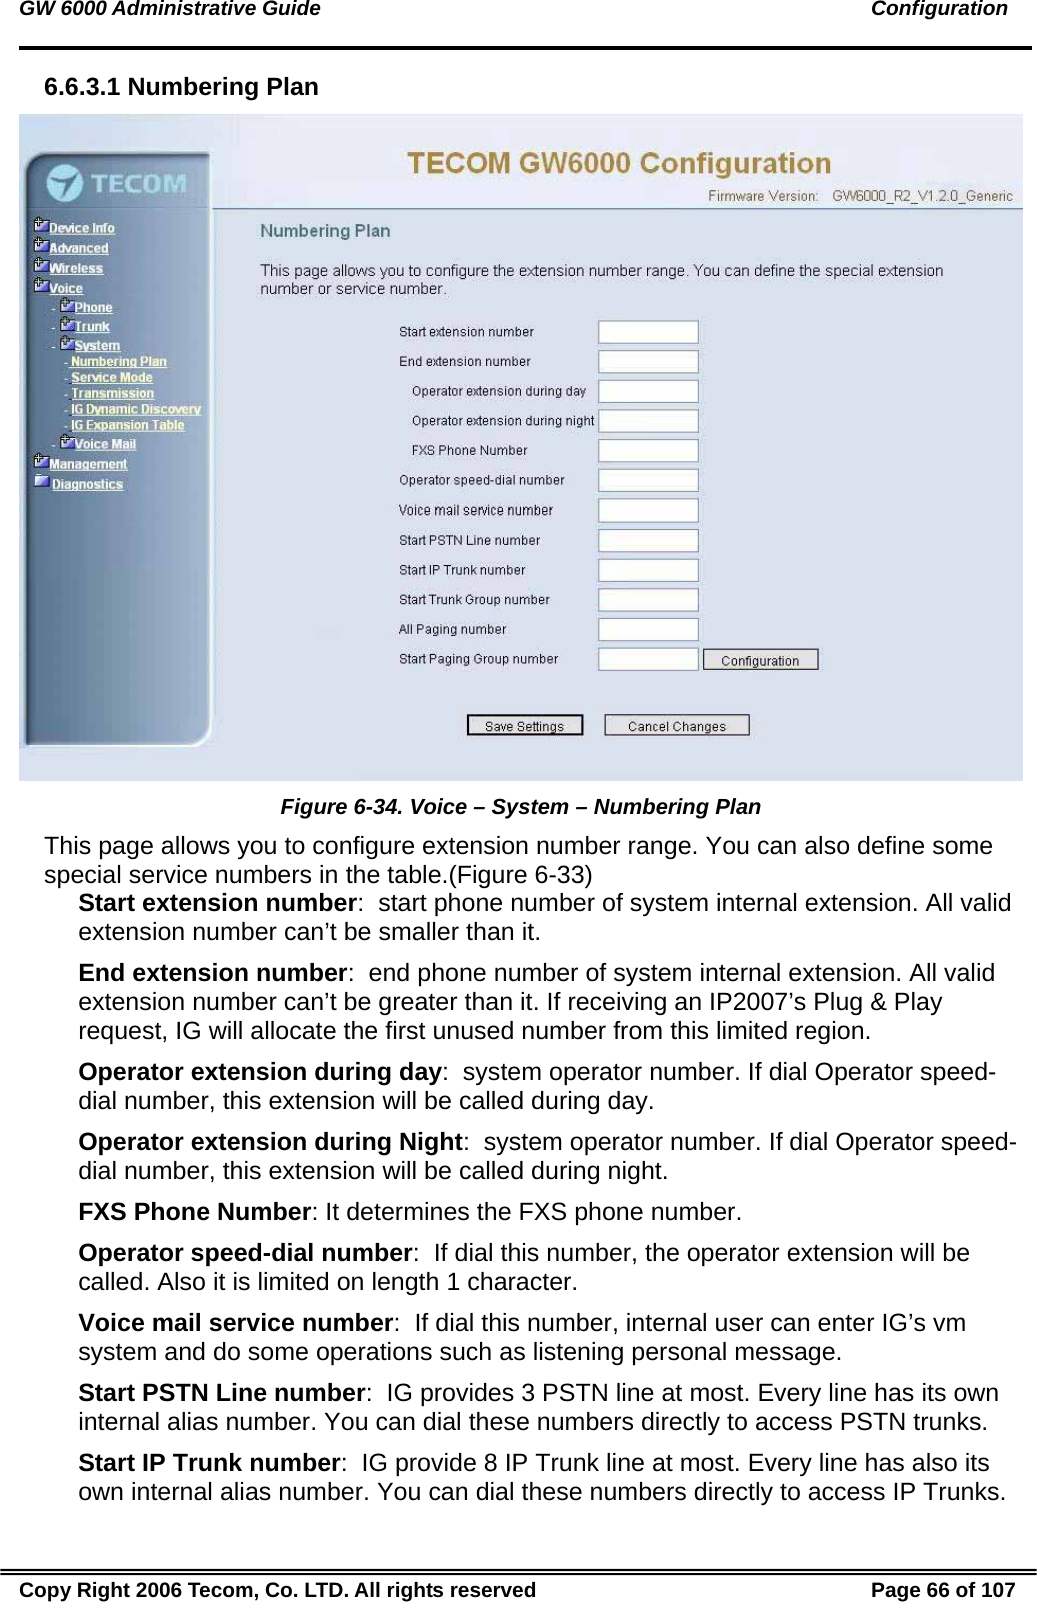 GW 6000 Administrative Guide                                                                                               Configuration 6.6.3.1 Numbering Plan  Figure 6-34. Voice – System – Numbering Plan This page allows you to configure extension number range. You can also define some special service numbers in the table.(Figure 6-33) Start extension number:  start phone number of system internal extension. All valid extension number can’t be smaller than it. End extension number:  end phone number of system internal extension. All valid extension number can’t be greater than it. If receiving an IP2007’s Plug &amp; Play request, IG will allocate the first unused number from this limited region.  Operator extension during day:  system operator number. If dial Operator speed-dial number, this extension will be called during day. Operator extension during Night:  system operator number. If dial Operator speed-dial number, this extension will be called during night. FXS Phone Number: It determines the FXS phone number. Operator speed-dial number:  If dial this number, the operator extension will be called. Also it is limited on length 1 character. Voice mail service number:  If dial this number, internal user can enter IG’s vm system and do some operations such as listening personal message. Start PSTN Line number:  IG provides 3 PSTN line at most. Every line has its own internal alias number. You can dial these numbers directly to access PSTN trunks. Start IP Trunk number:  IG provide 8 IP Trunk line at most. Every line has also its own internal alias number. You can dial these numbers directly to access IP Trunks. Copy Right 2006 Tecom, Co. LTD. All rights reserved  Page 66 of 107 